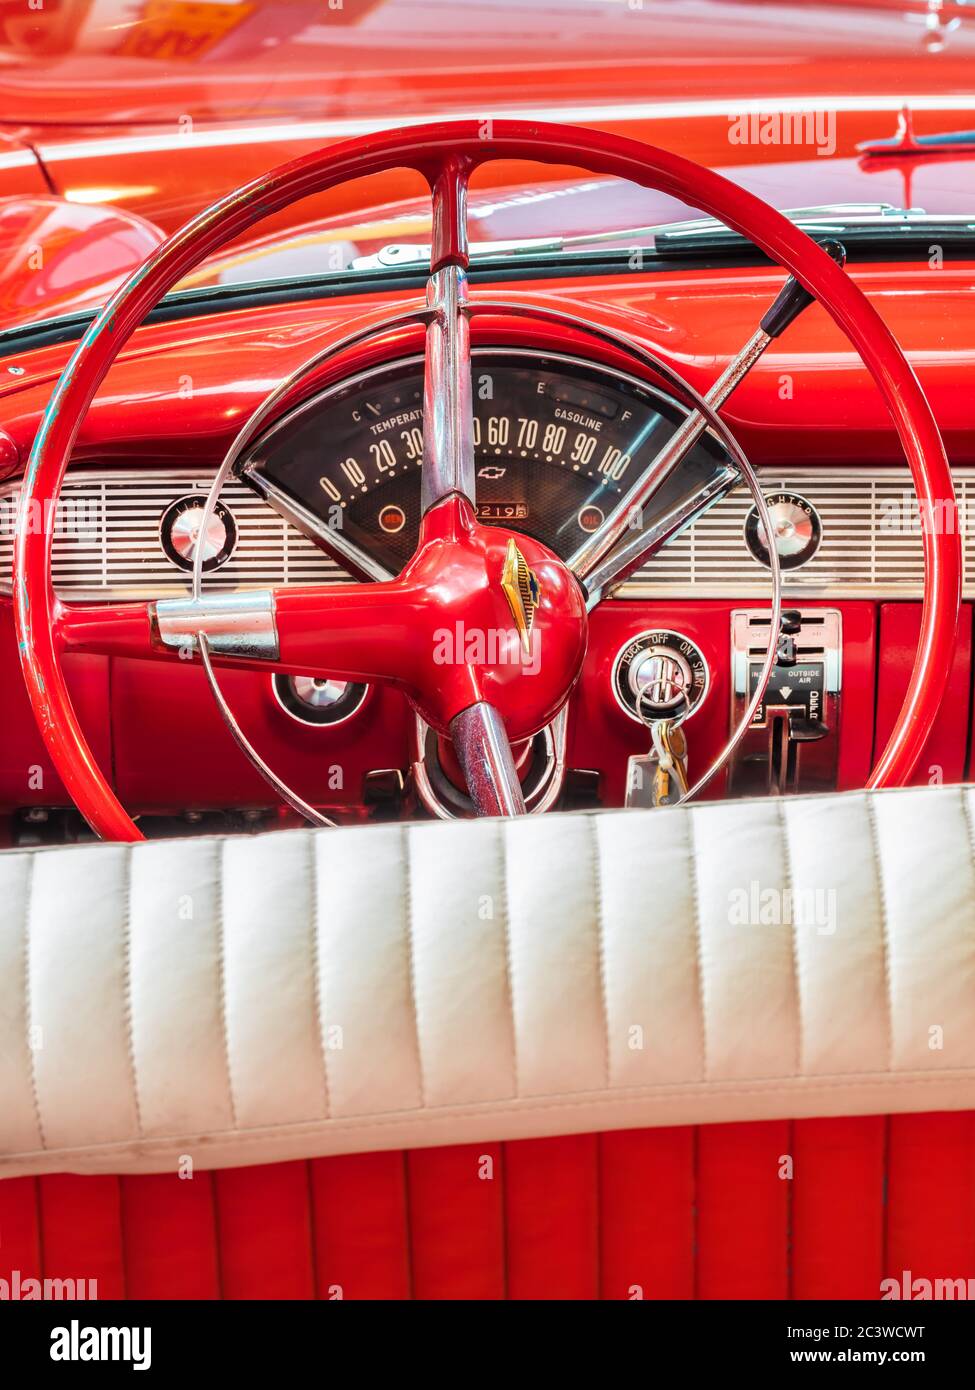 Drempt, The Netherlands - June 11, 2020: Interior of a red 1956 Chevrolet Bel Air Convertible classic car  in the Dutch village of Drempt, The Netherl Stock Photo